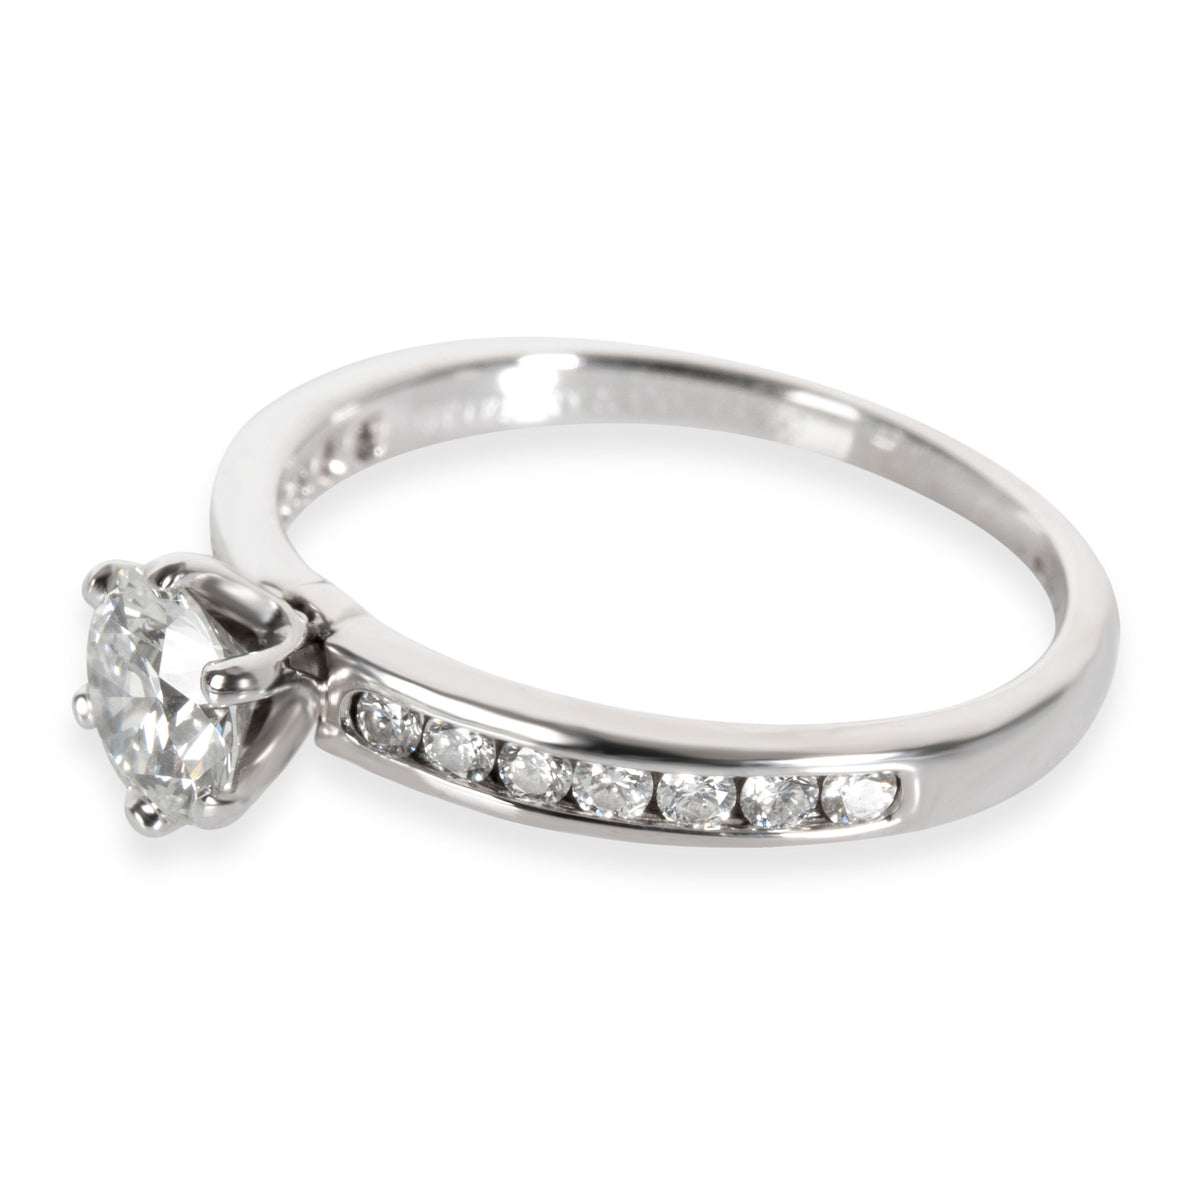 Tiffany & Co. Channel Diamond Engagement Ring in Platinum (0.62 ct F/VVS1)